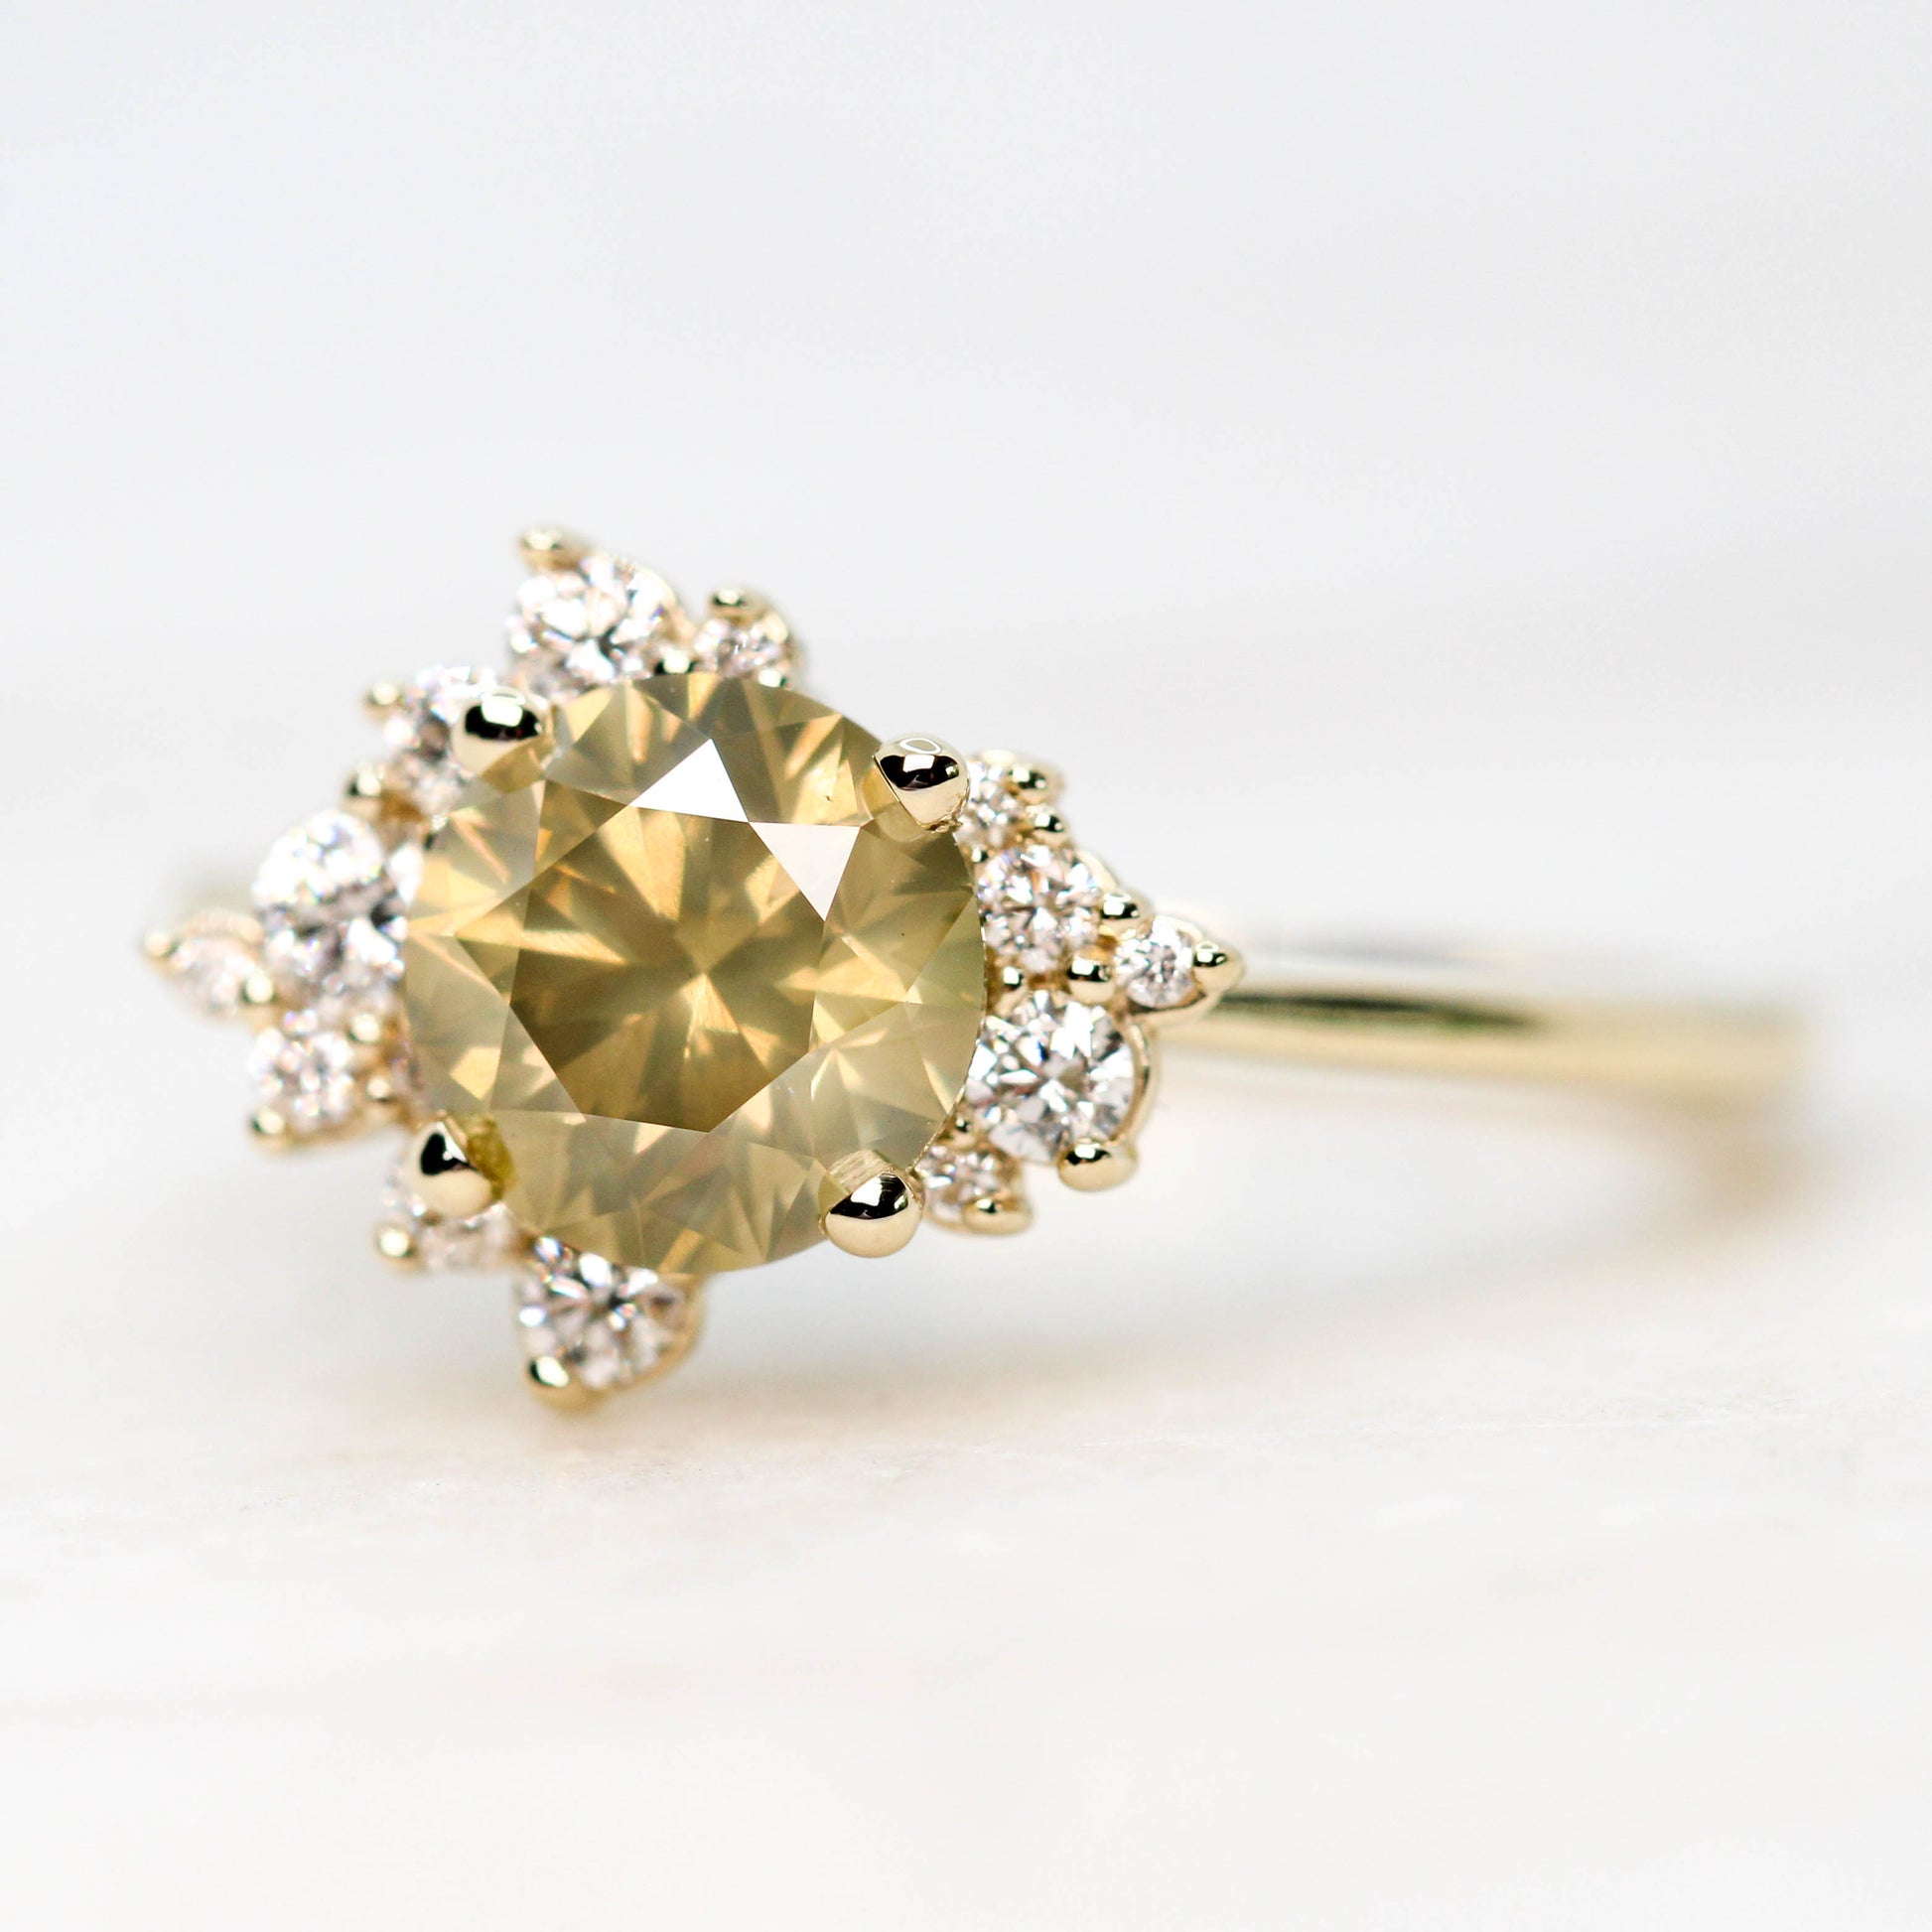 Orion Ring with a 1.35 Carat Champagne Round Diamond and White Accent Diamonds in 14k Yellow Gold - Ready to Size and Ship - Midwinter Co. Alternative Bridal Rings and Modern Fine Jewelry